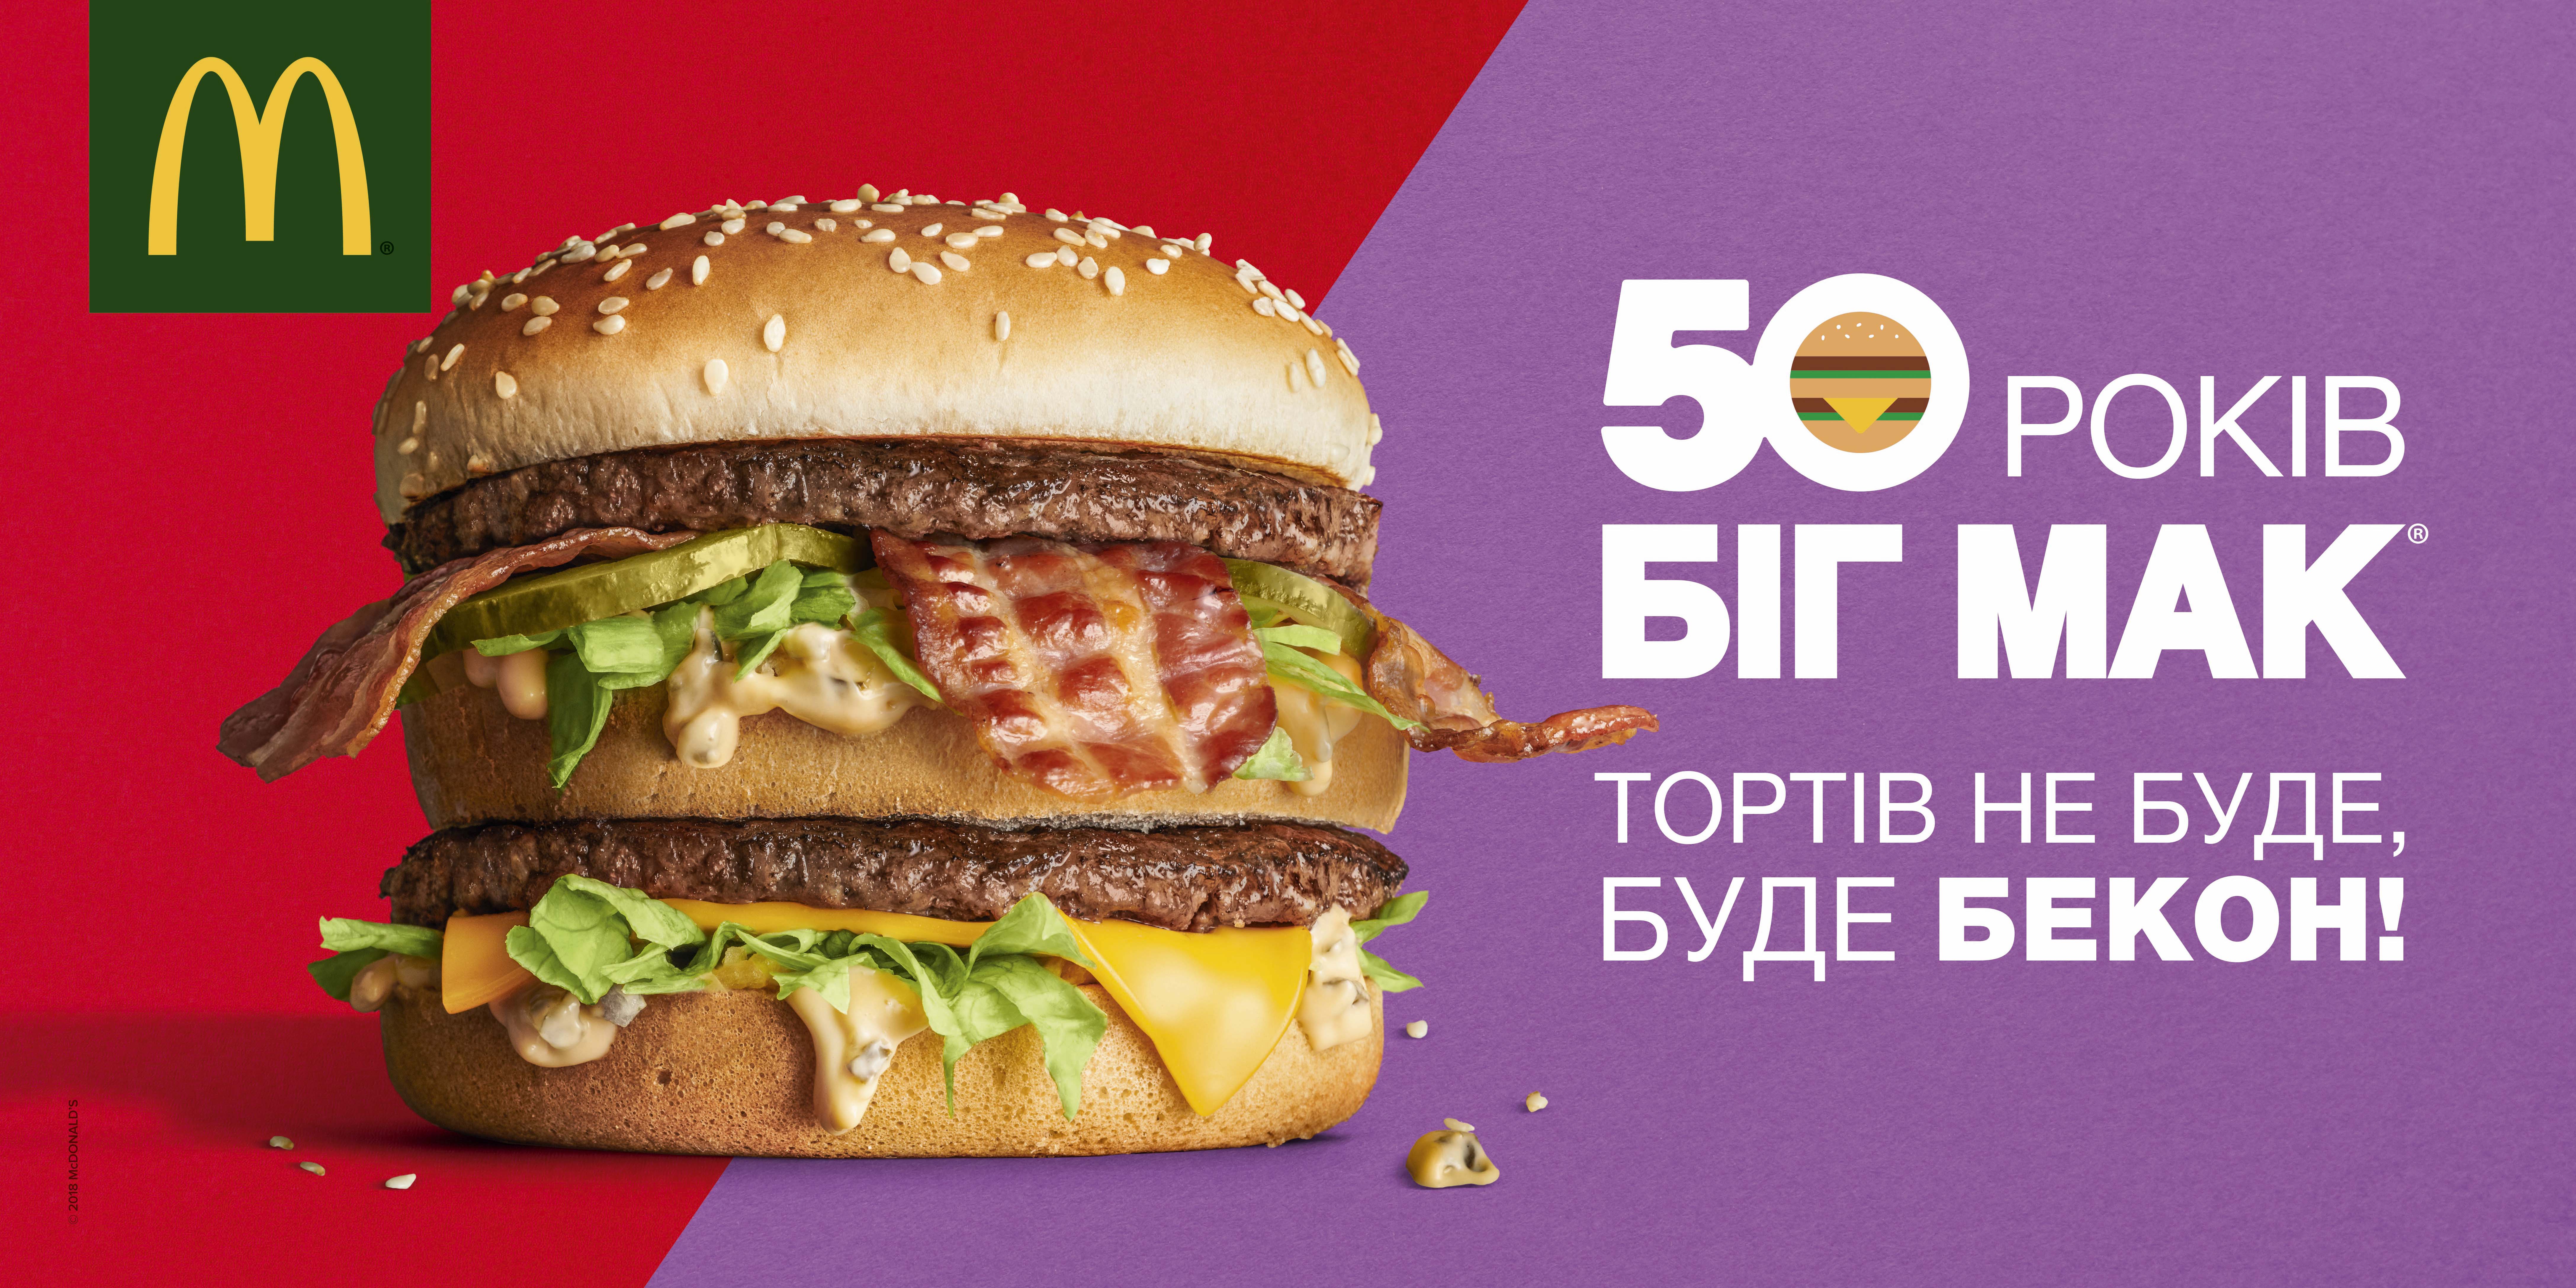 50 Years of the big mac promotion